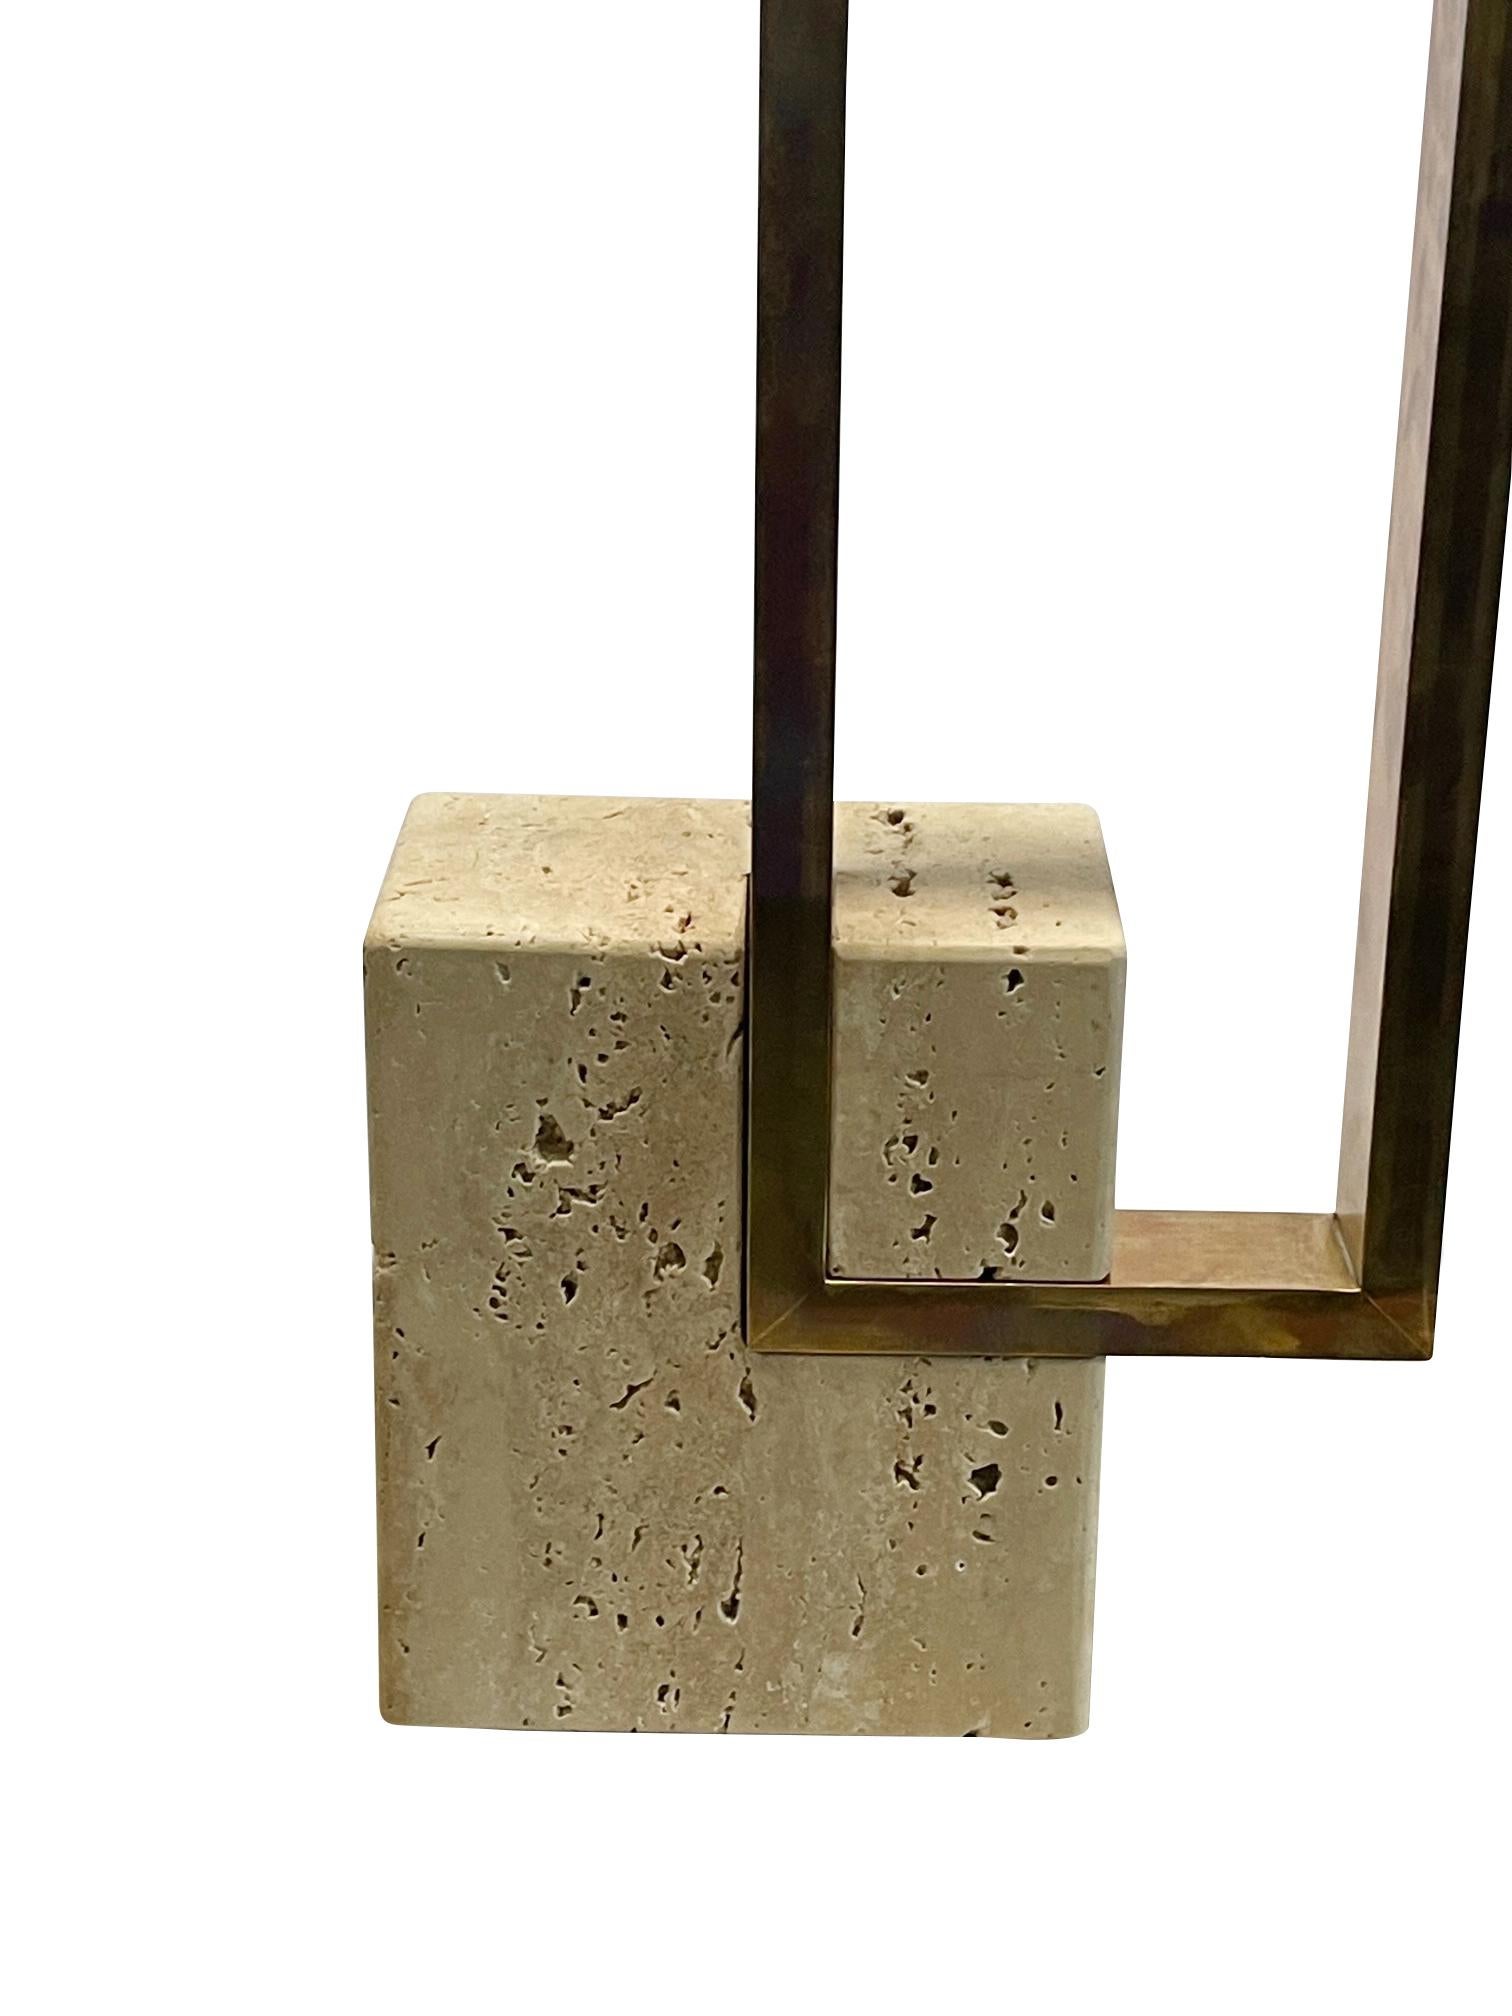 1960's Italian pair of travertine lamps with offset vertical brass rectangles.
Travertine base is unfilled and honed finish.